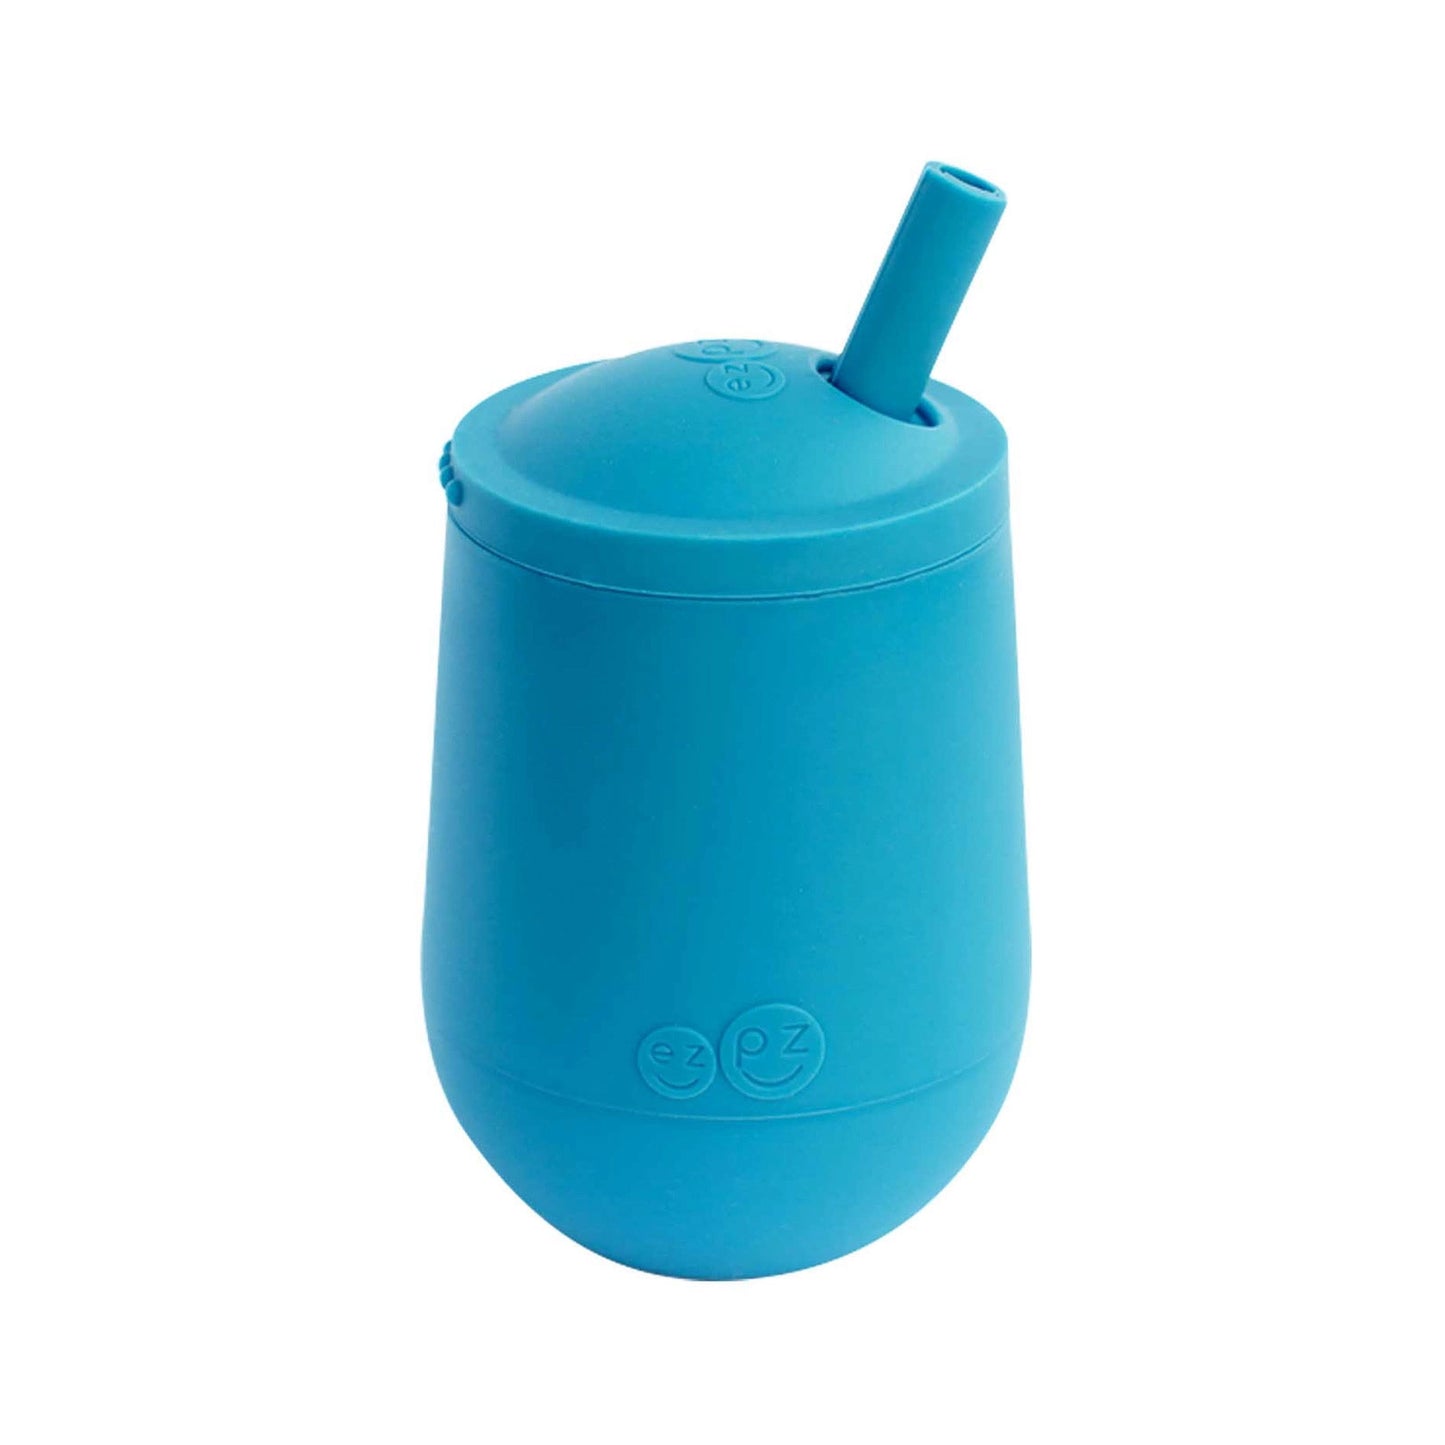 The EzPz Mini Cup + Straw Training System is designed to fit a toddler's mouth and hands, so they can learn to use a cup and handle a straw. Made from soft food grade silicone to protect developing teeth and gums. 